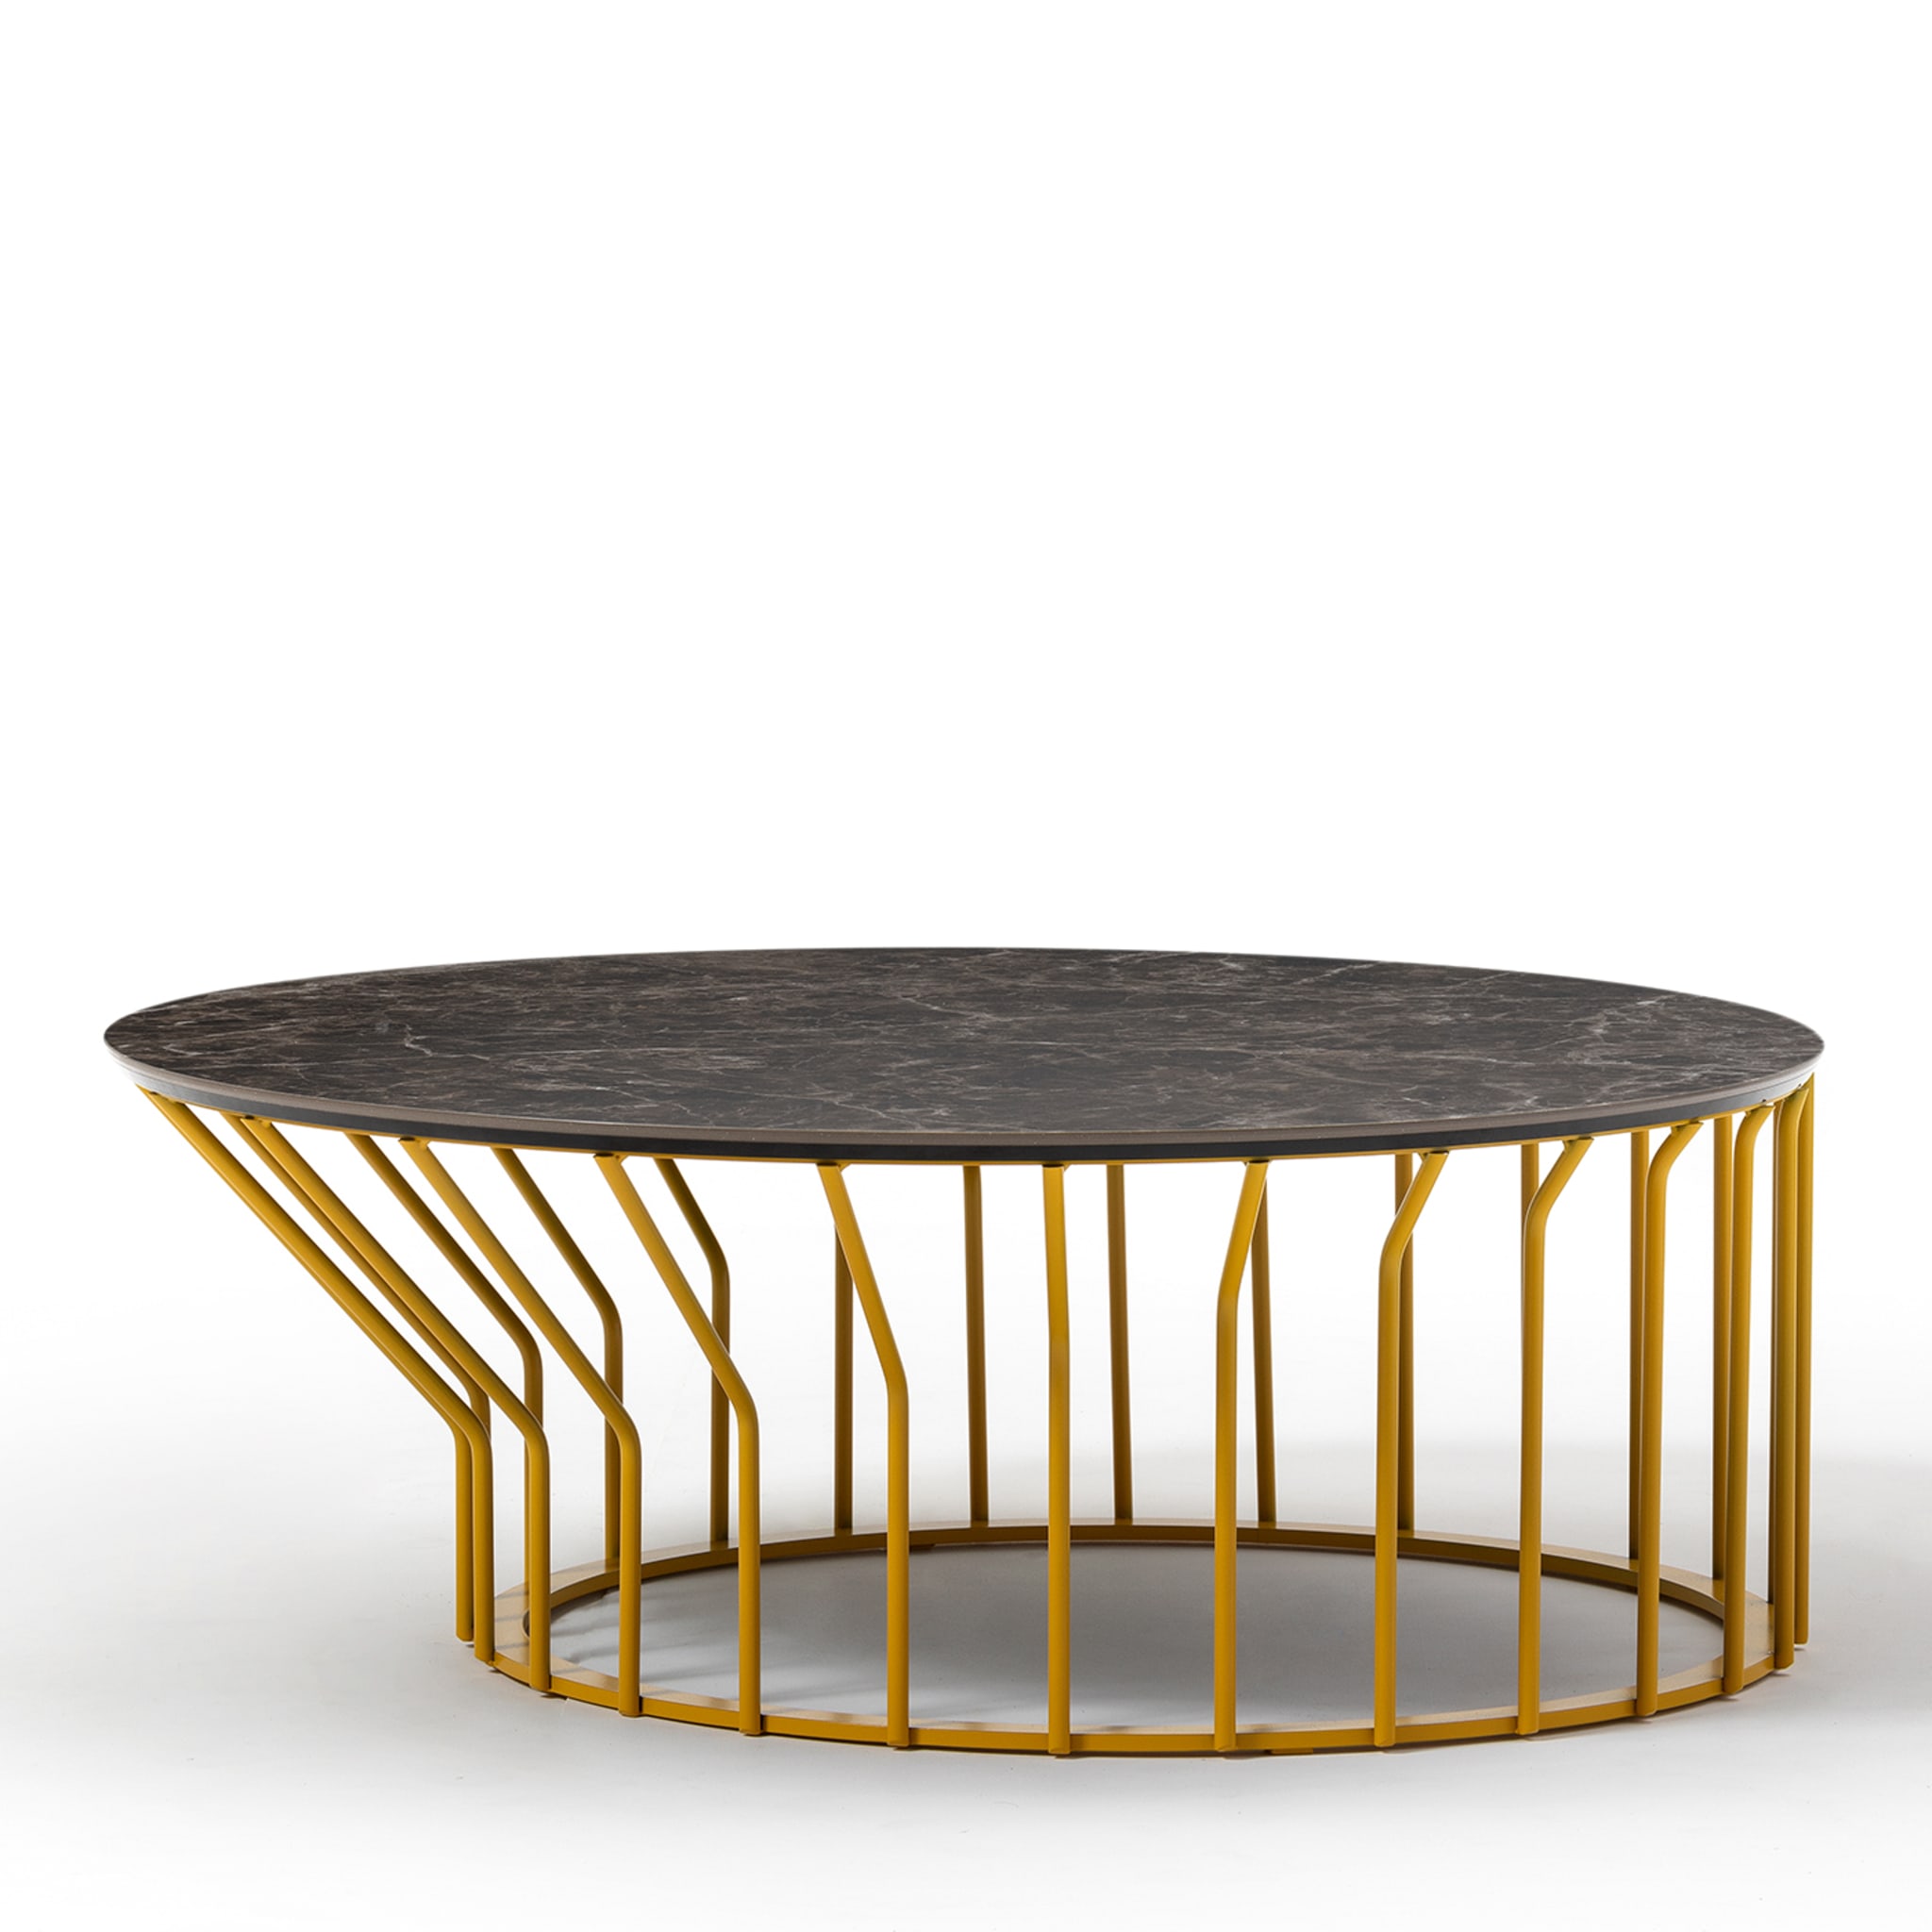 0134 Small Round Yellow Coffee Table - Alternative view 1